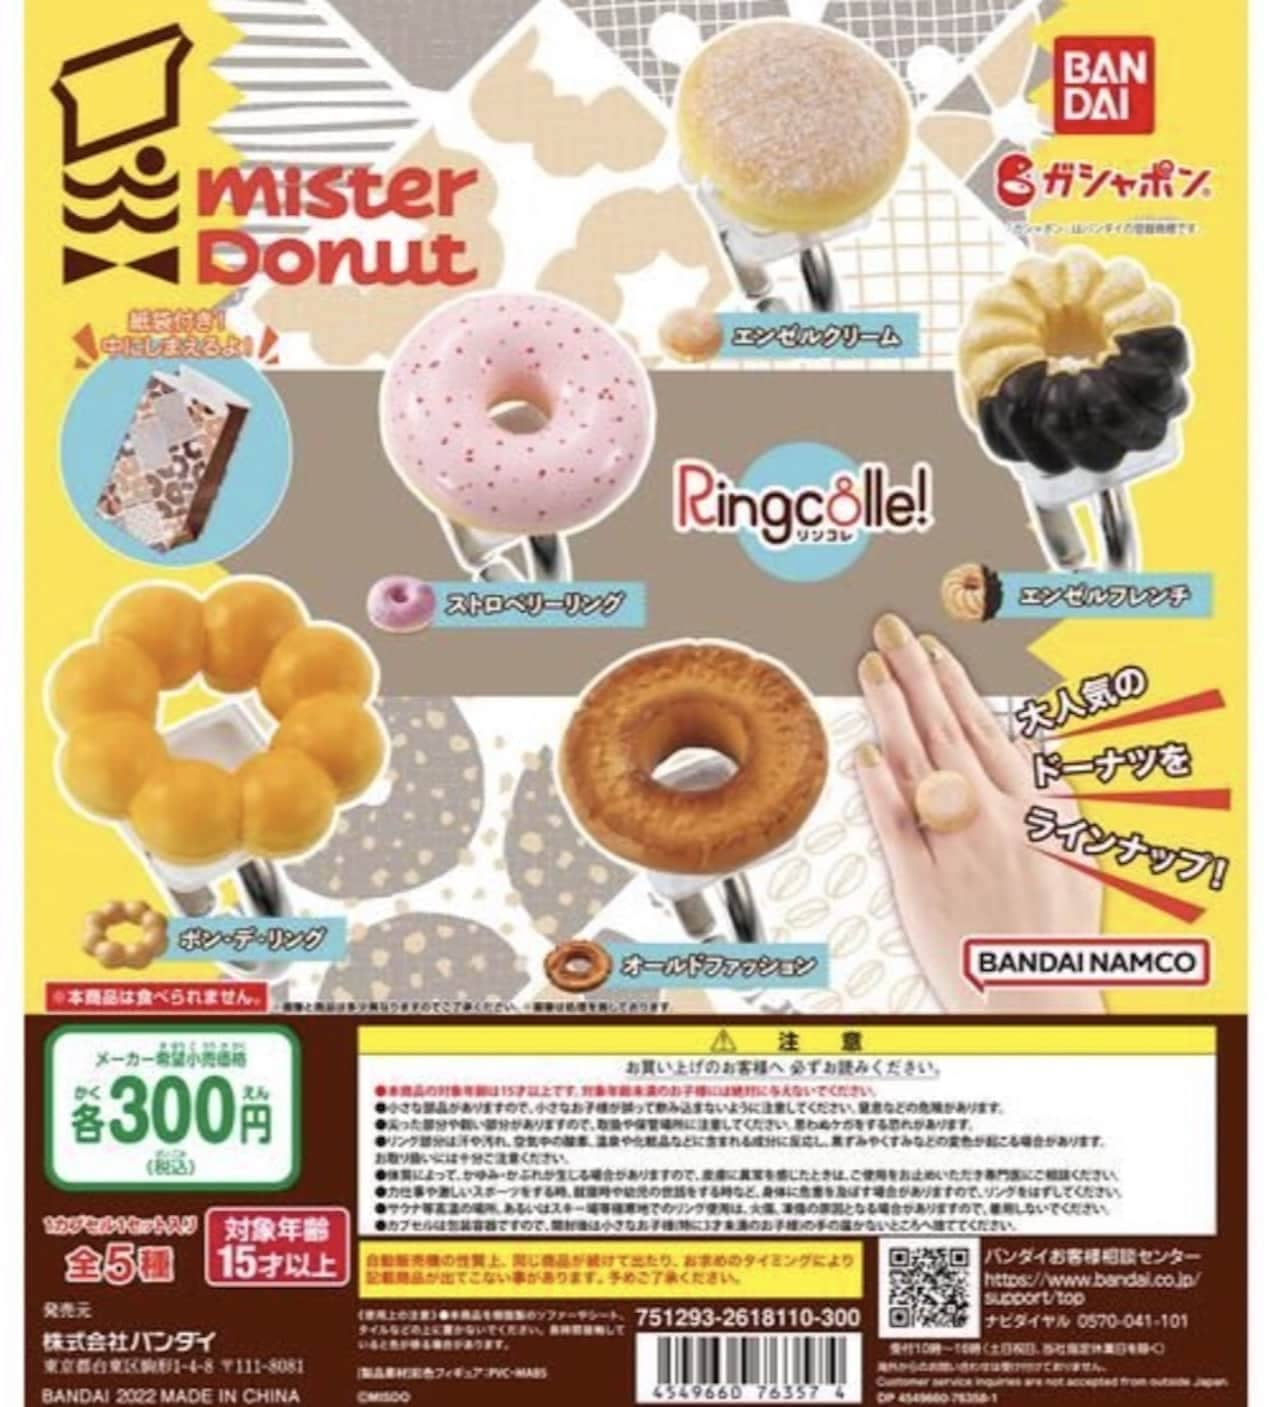 From "Ringcolle! Mr. Donut" Gashapon